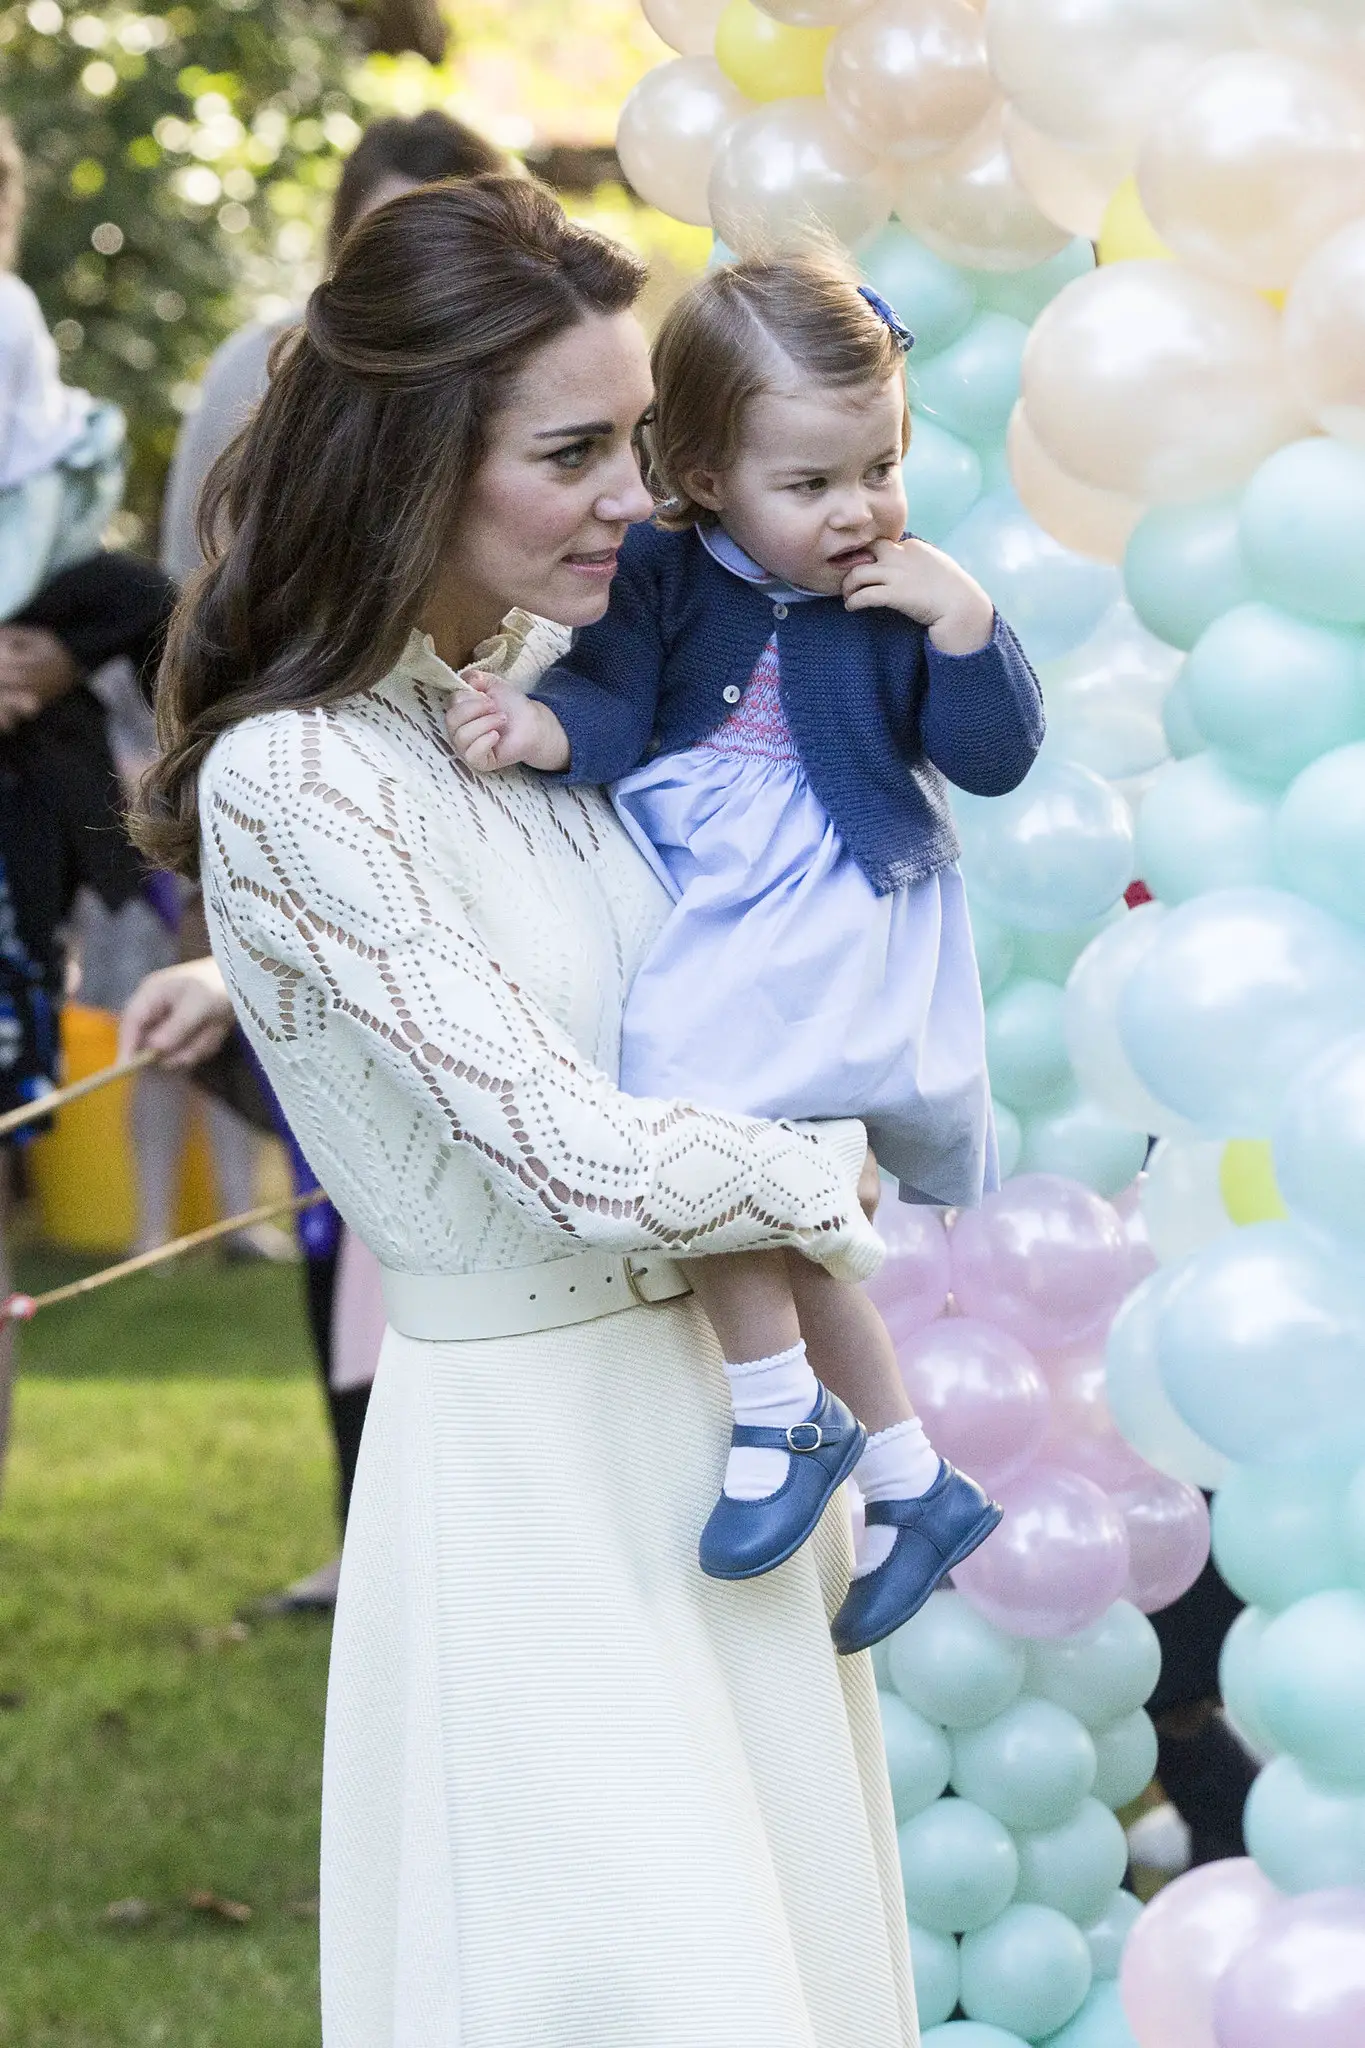 The Duchess of Cambridge with Princess Charlotte at the tea party in Canada